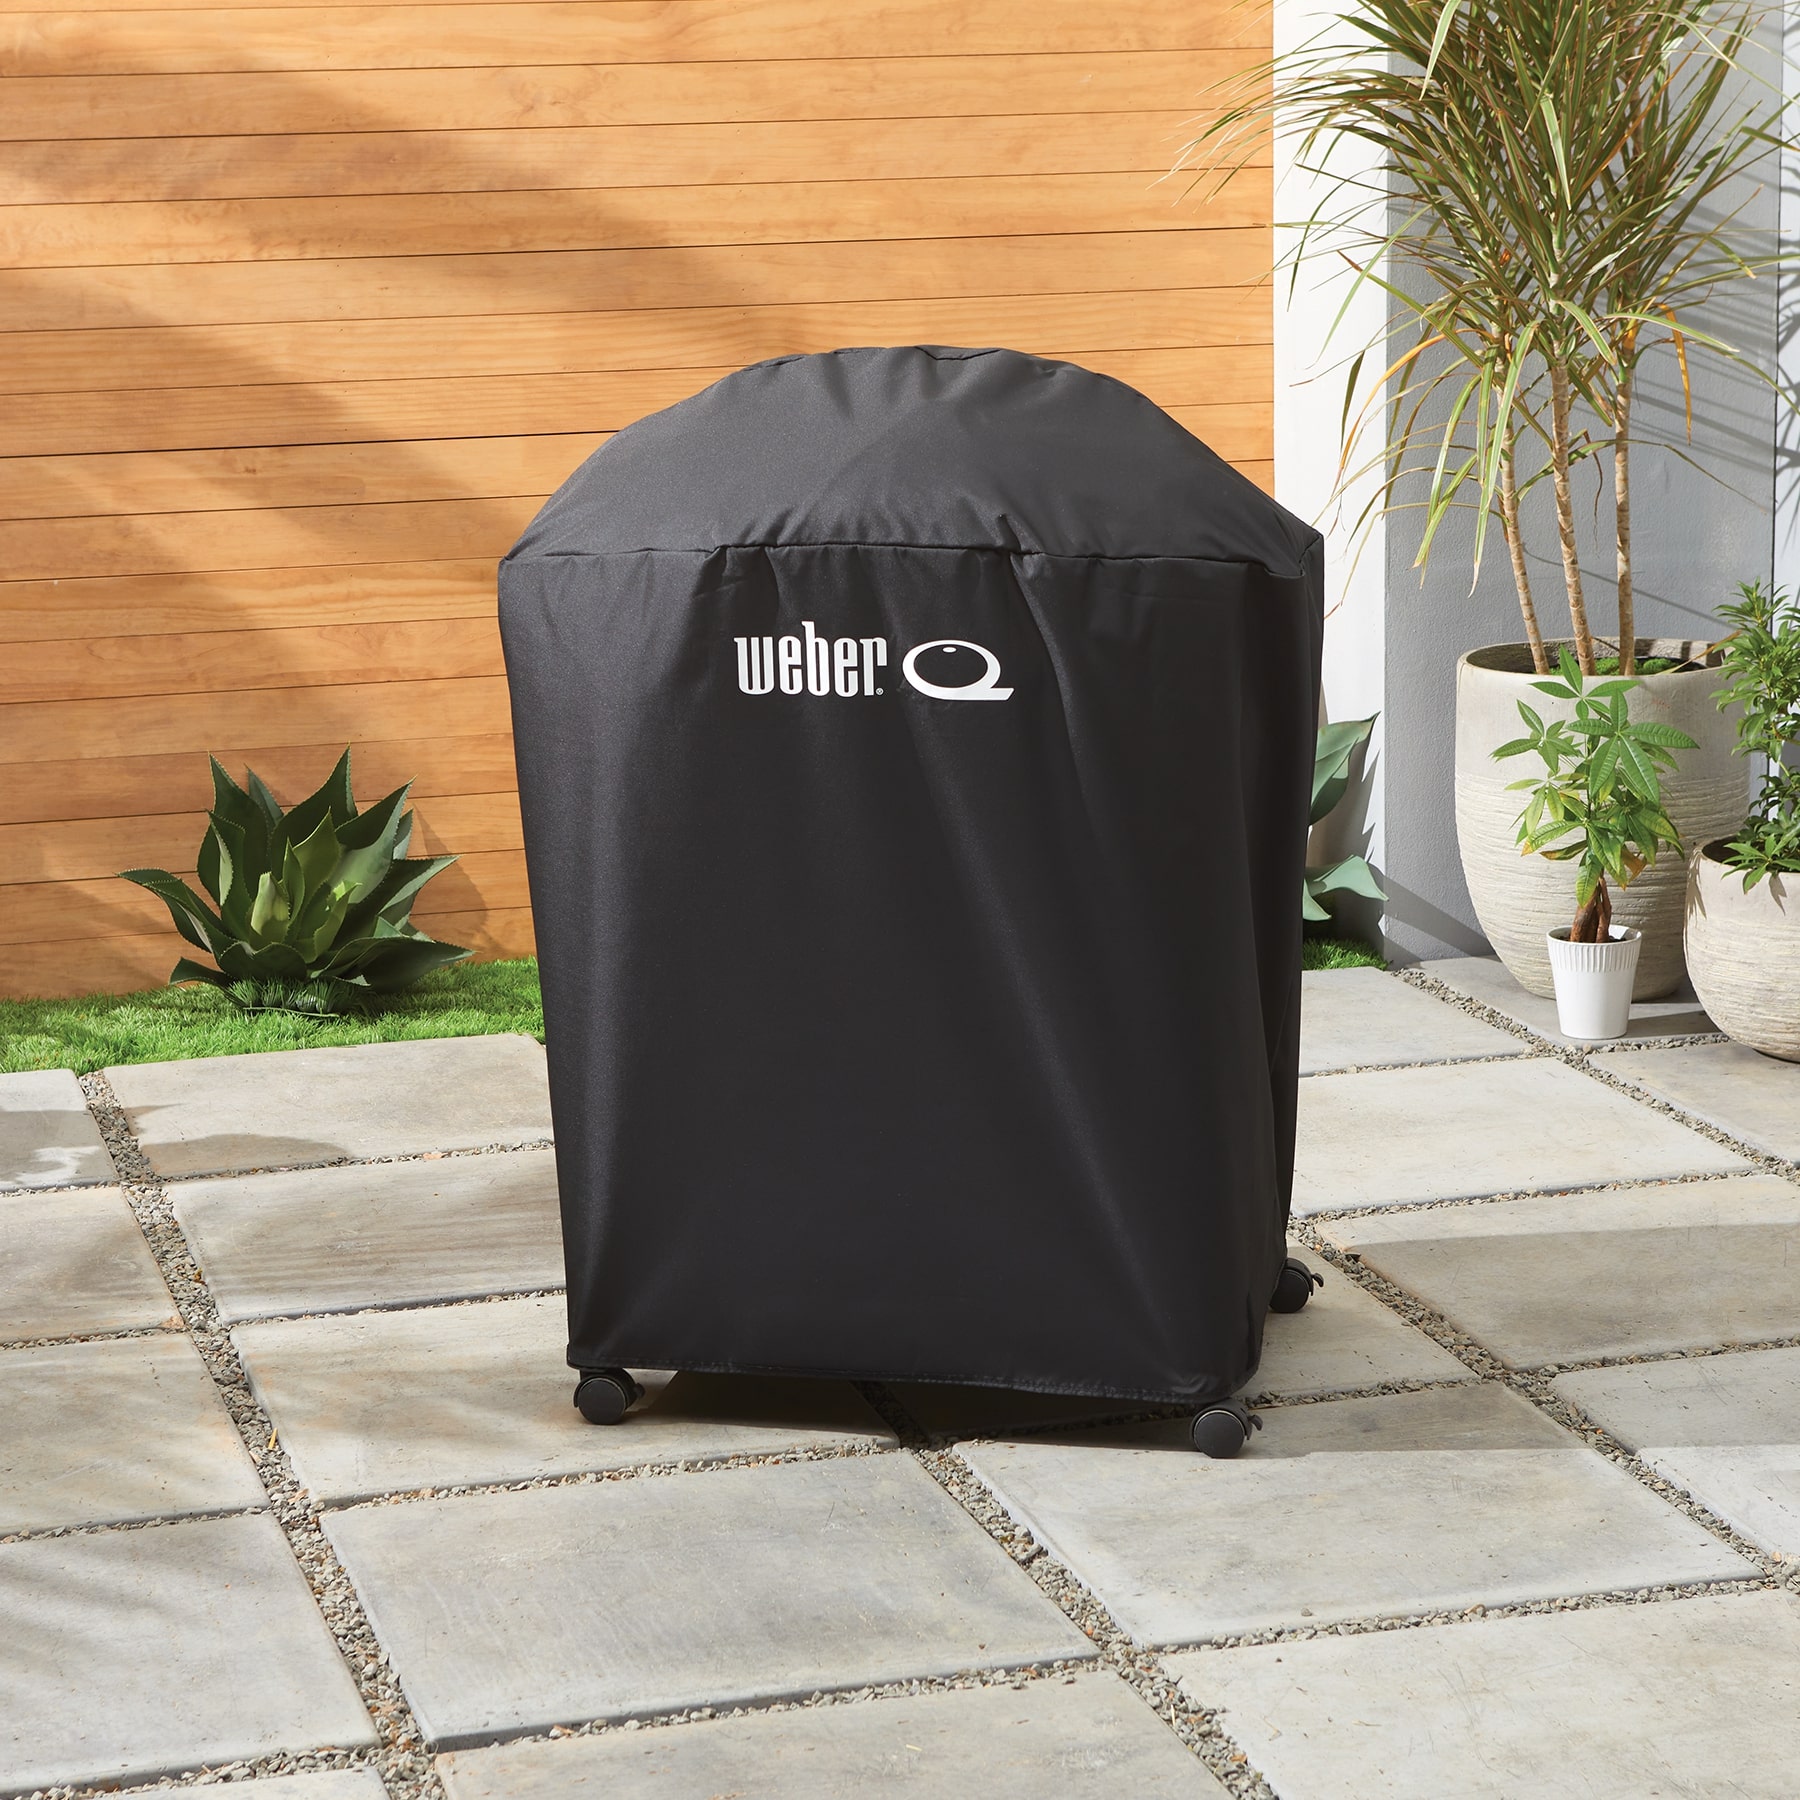 3400160-baby-q-and-q-bbq-and-cart-cover-4.jpg